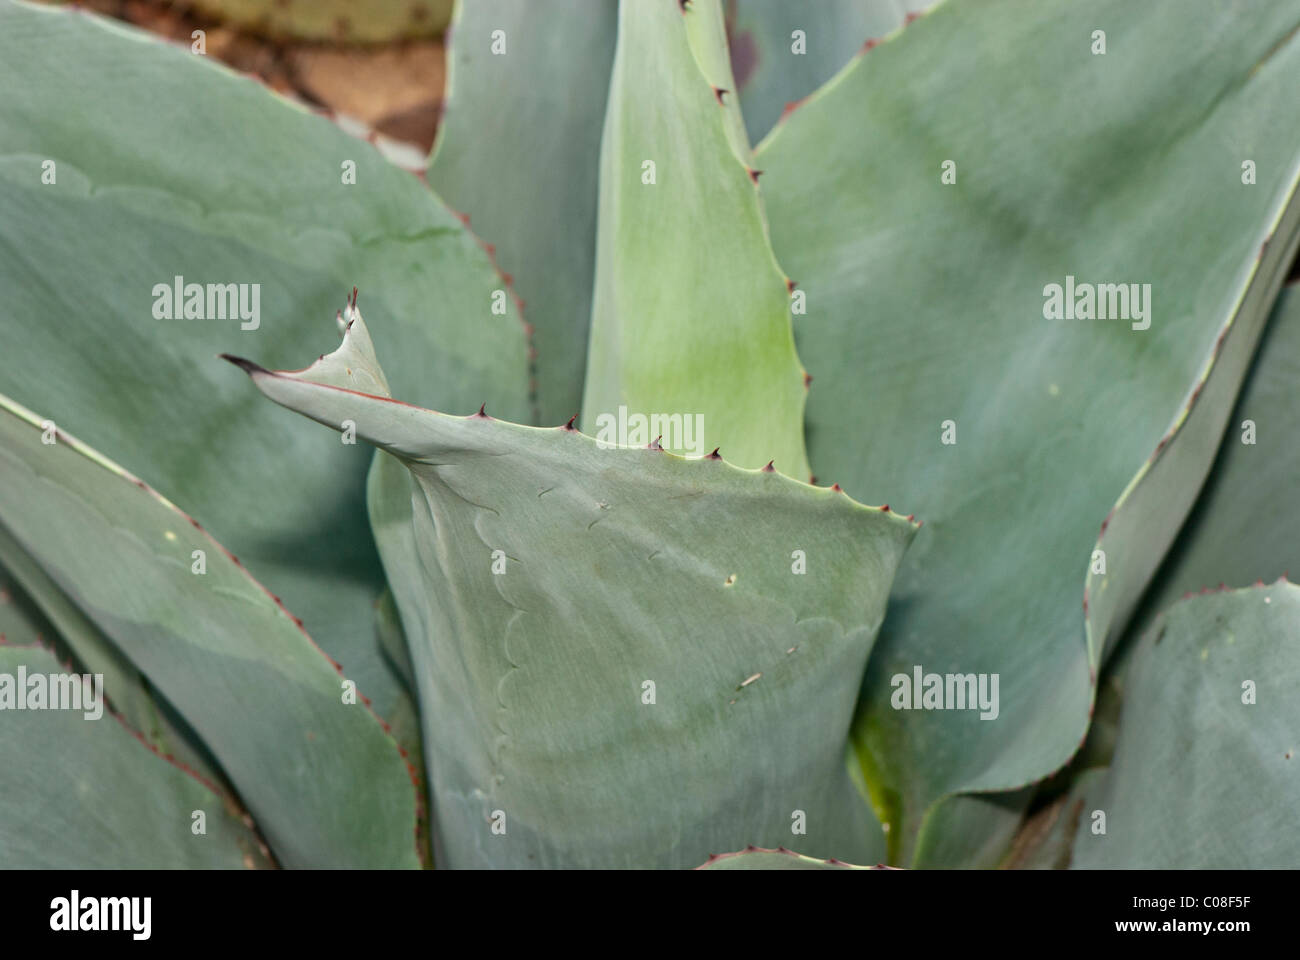 Agave parrasana clsoe up of leaves Agavaceae N. E. Mexico Stock Photo